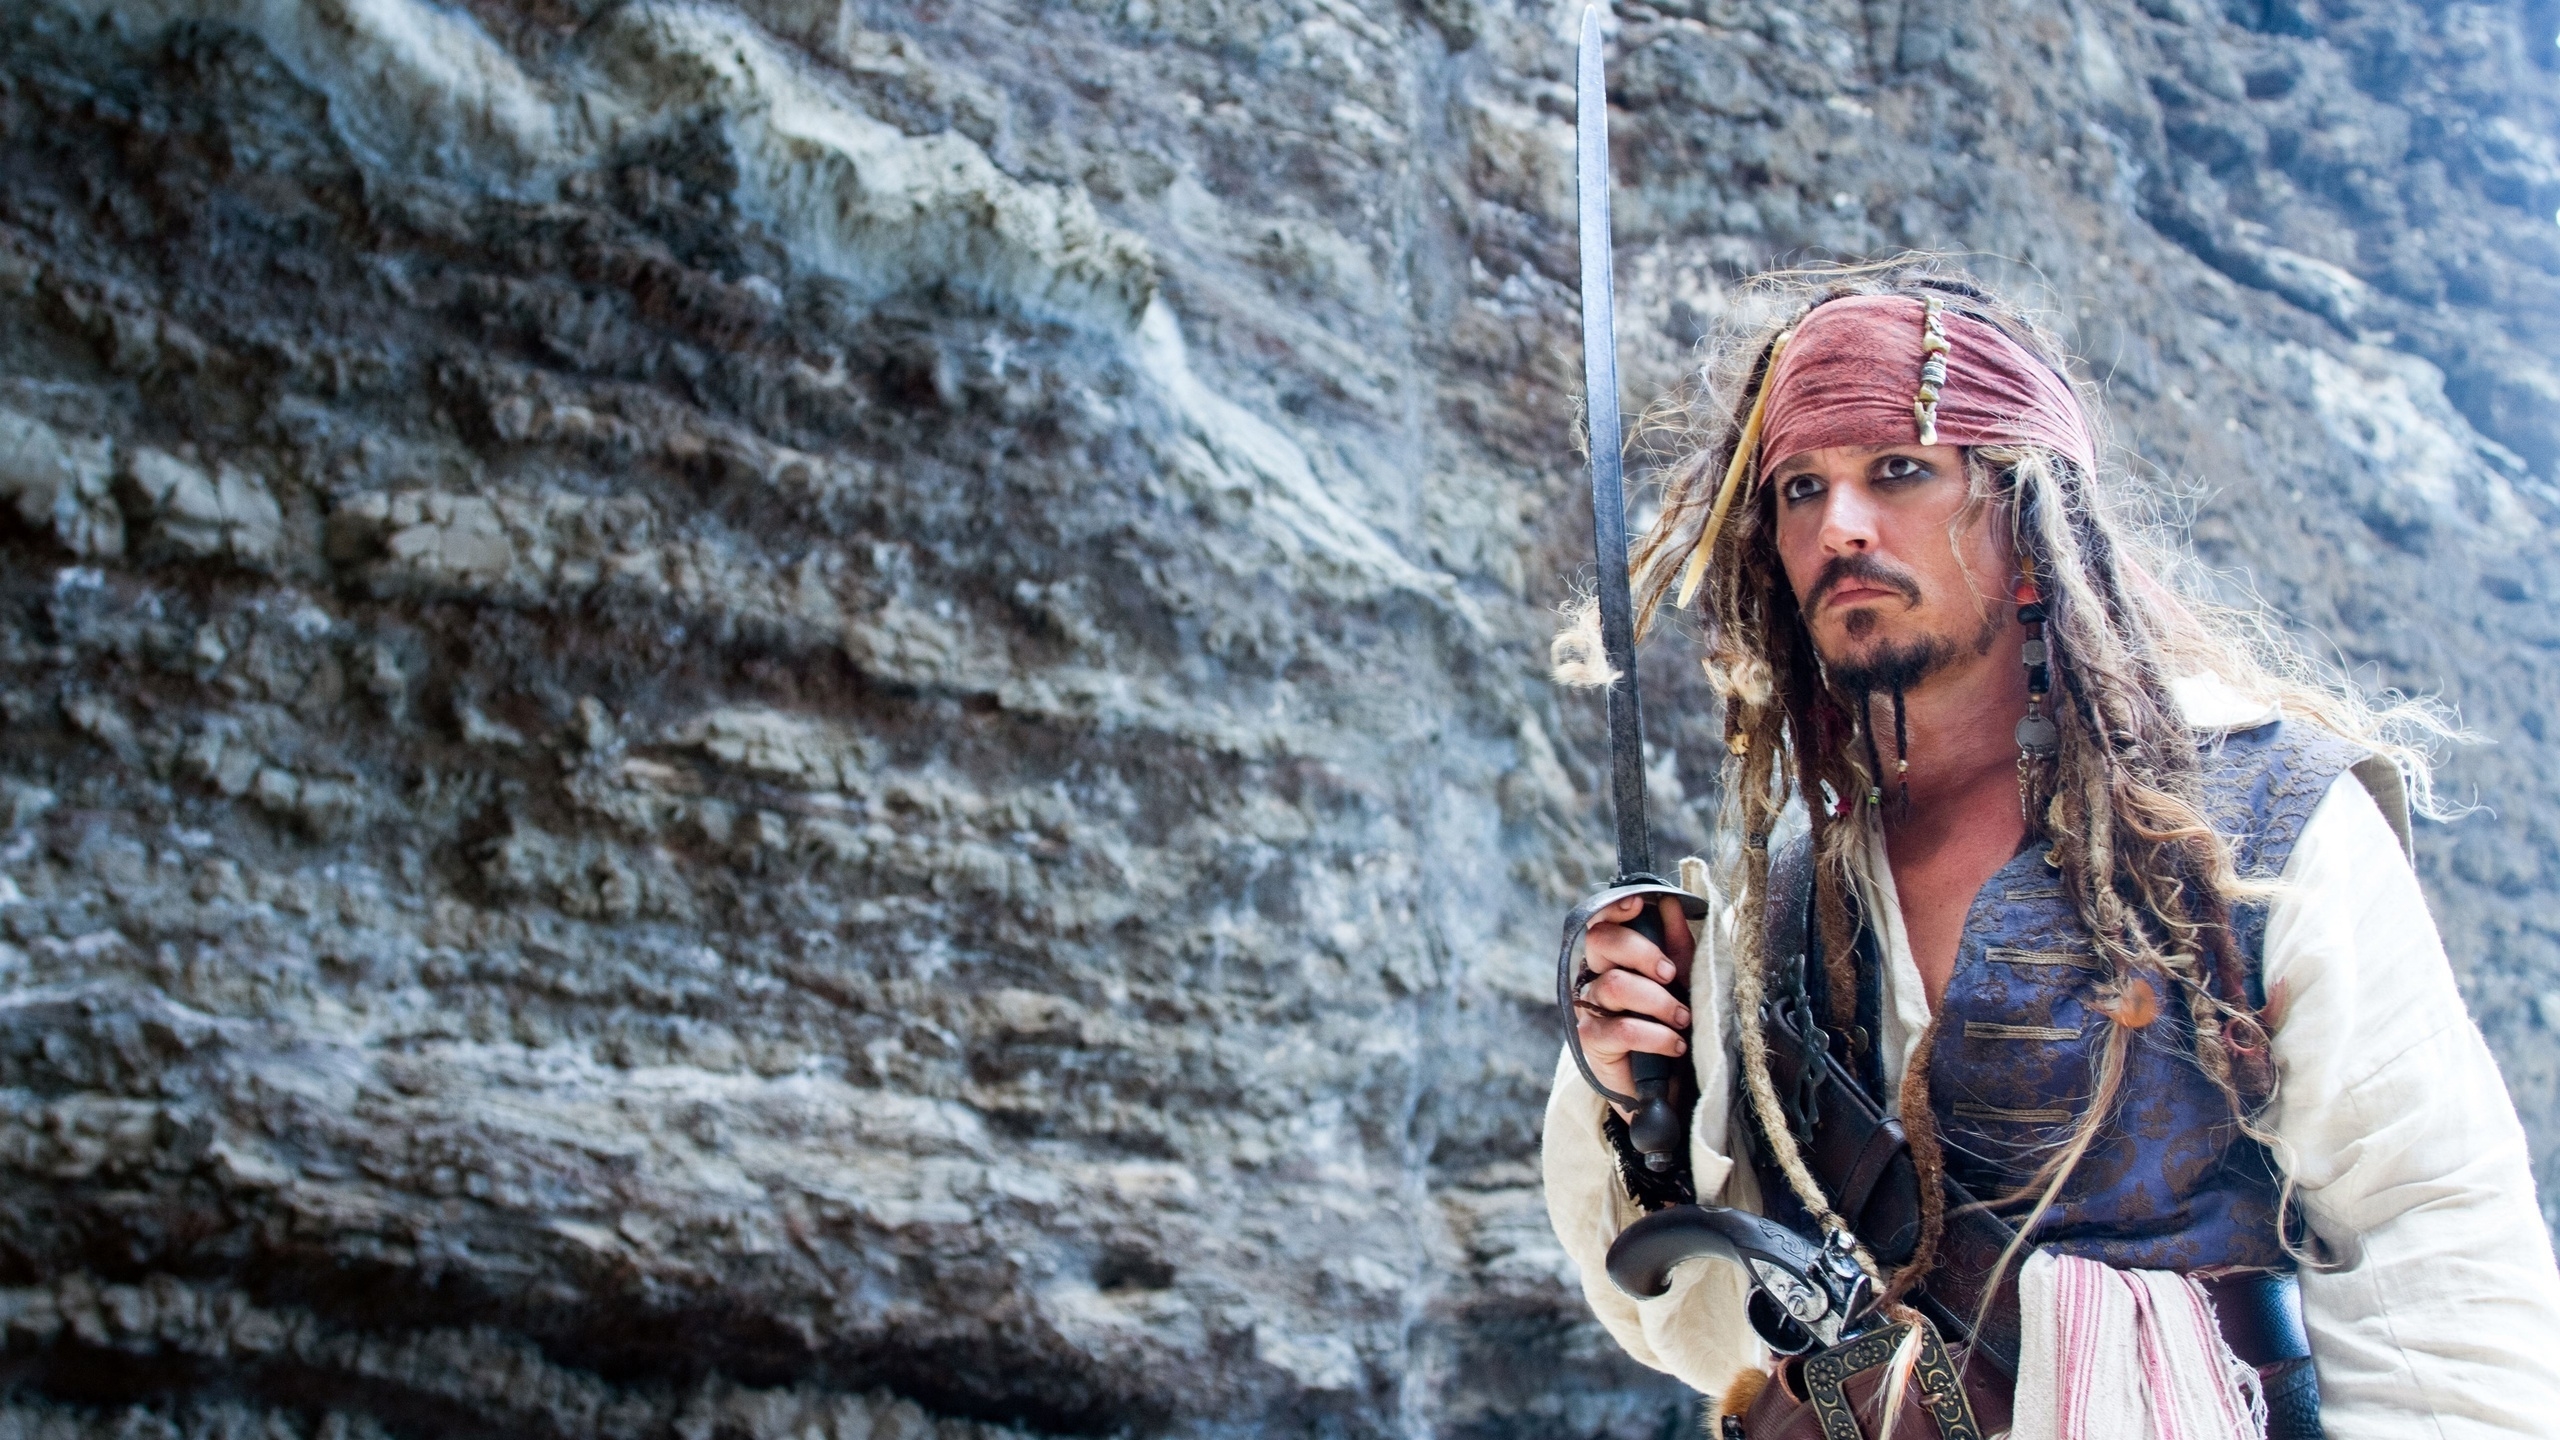 Jack Sparrow Pose for 2560x1440 HDTV resolution